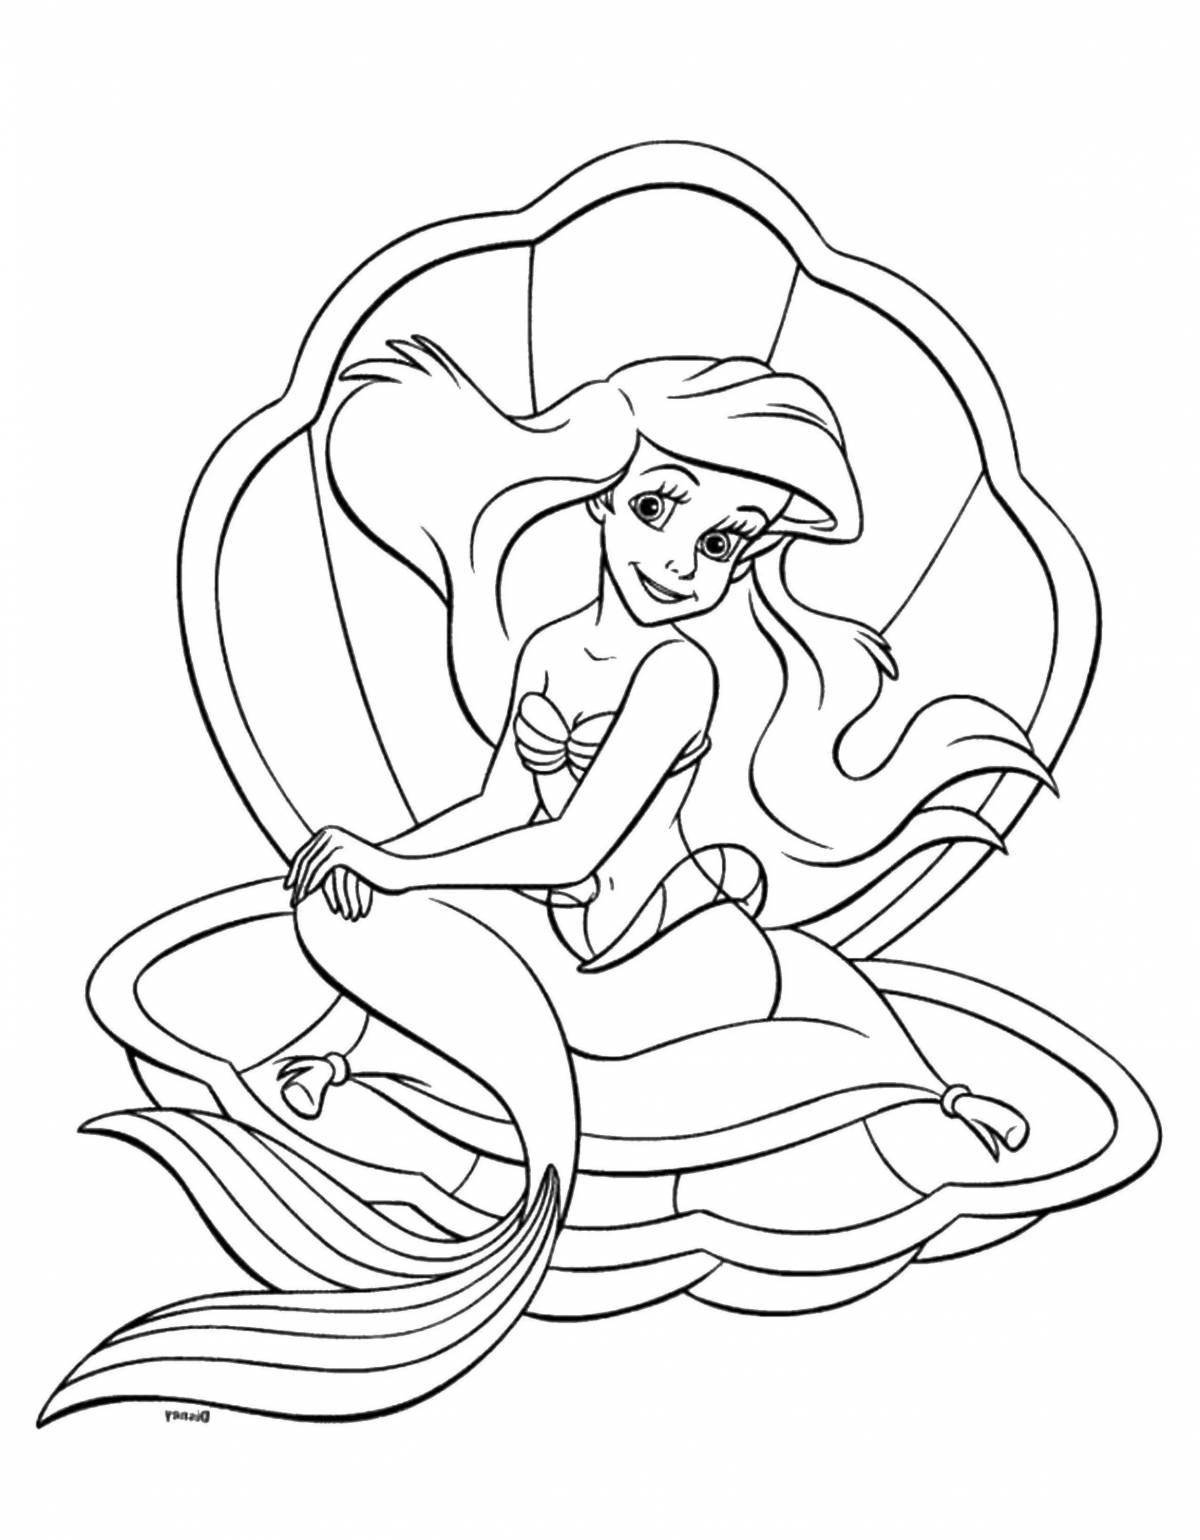 Charming little mermaid ariel coloring book for girls